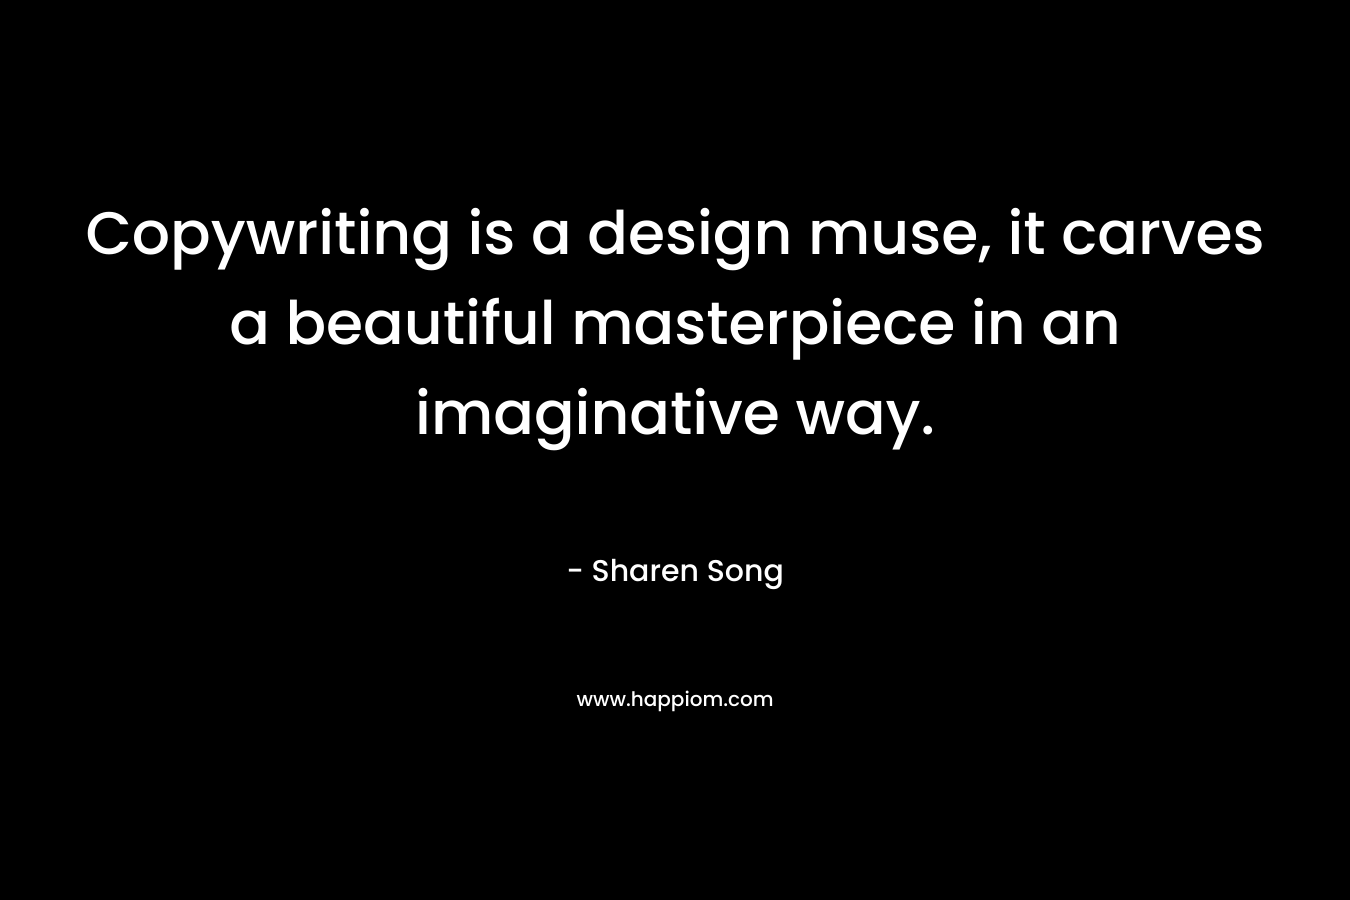 Copywriting is a design muse, it carves a beautiful masterpiece in an imaginative way. – Sharen Song